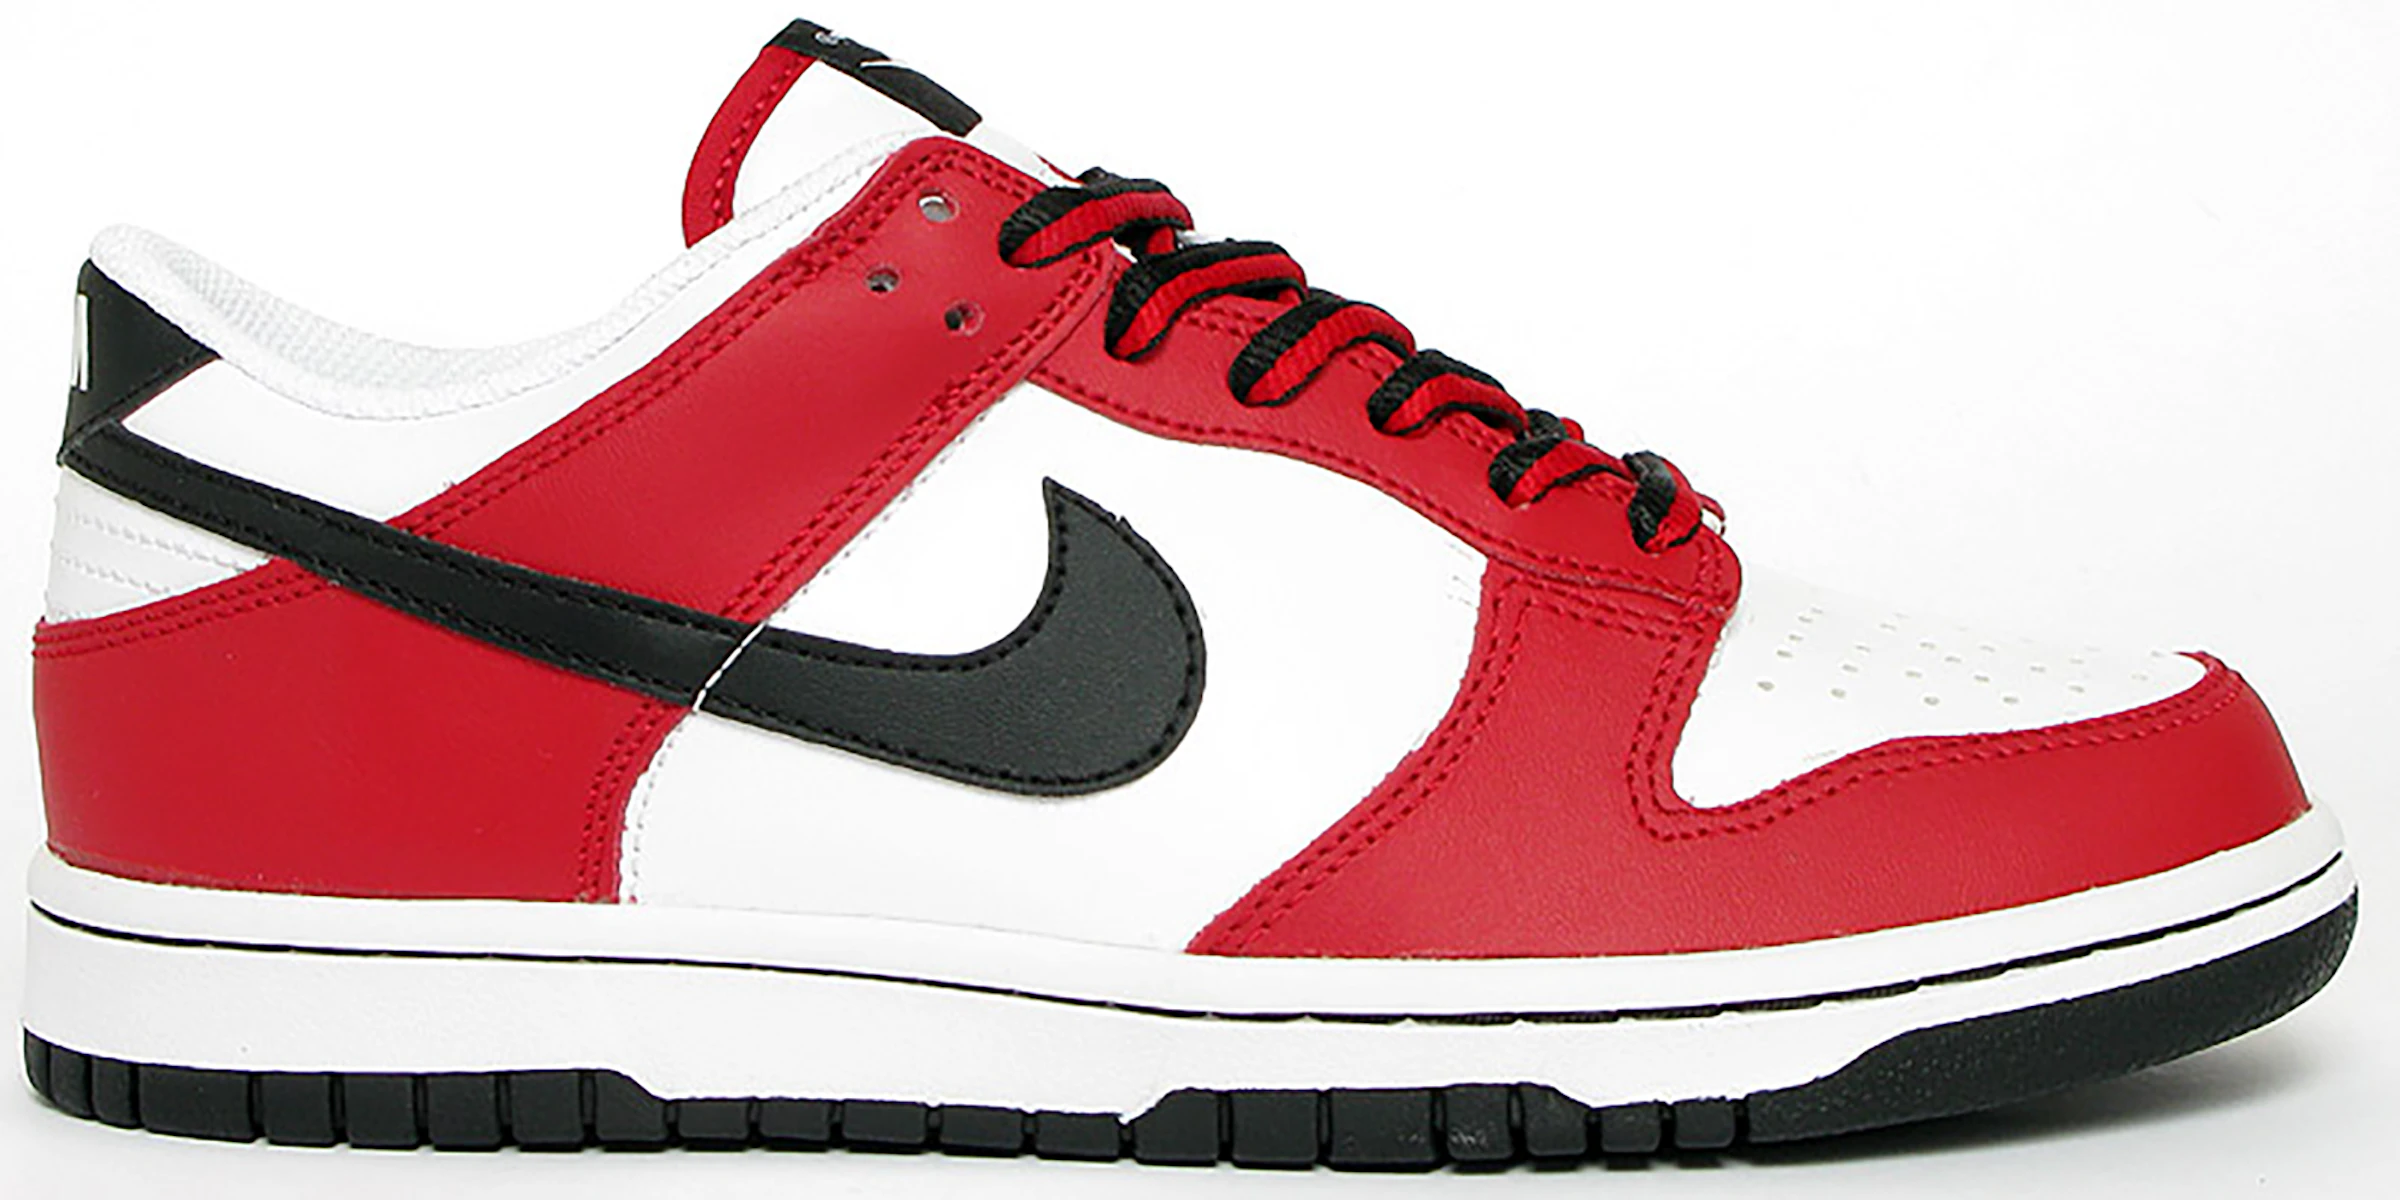 Get In The Game With Red And Black Nike Dunks - Shoe Effect